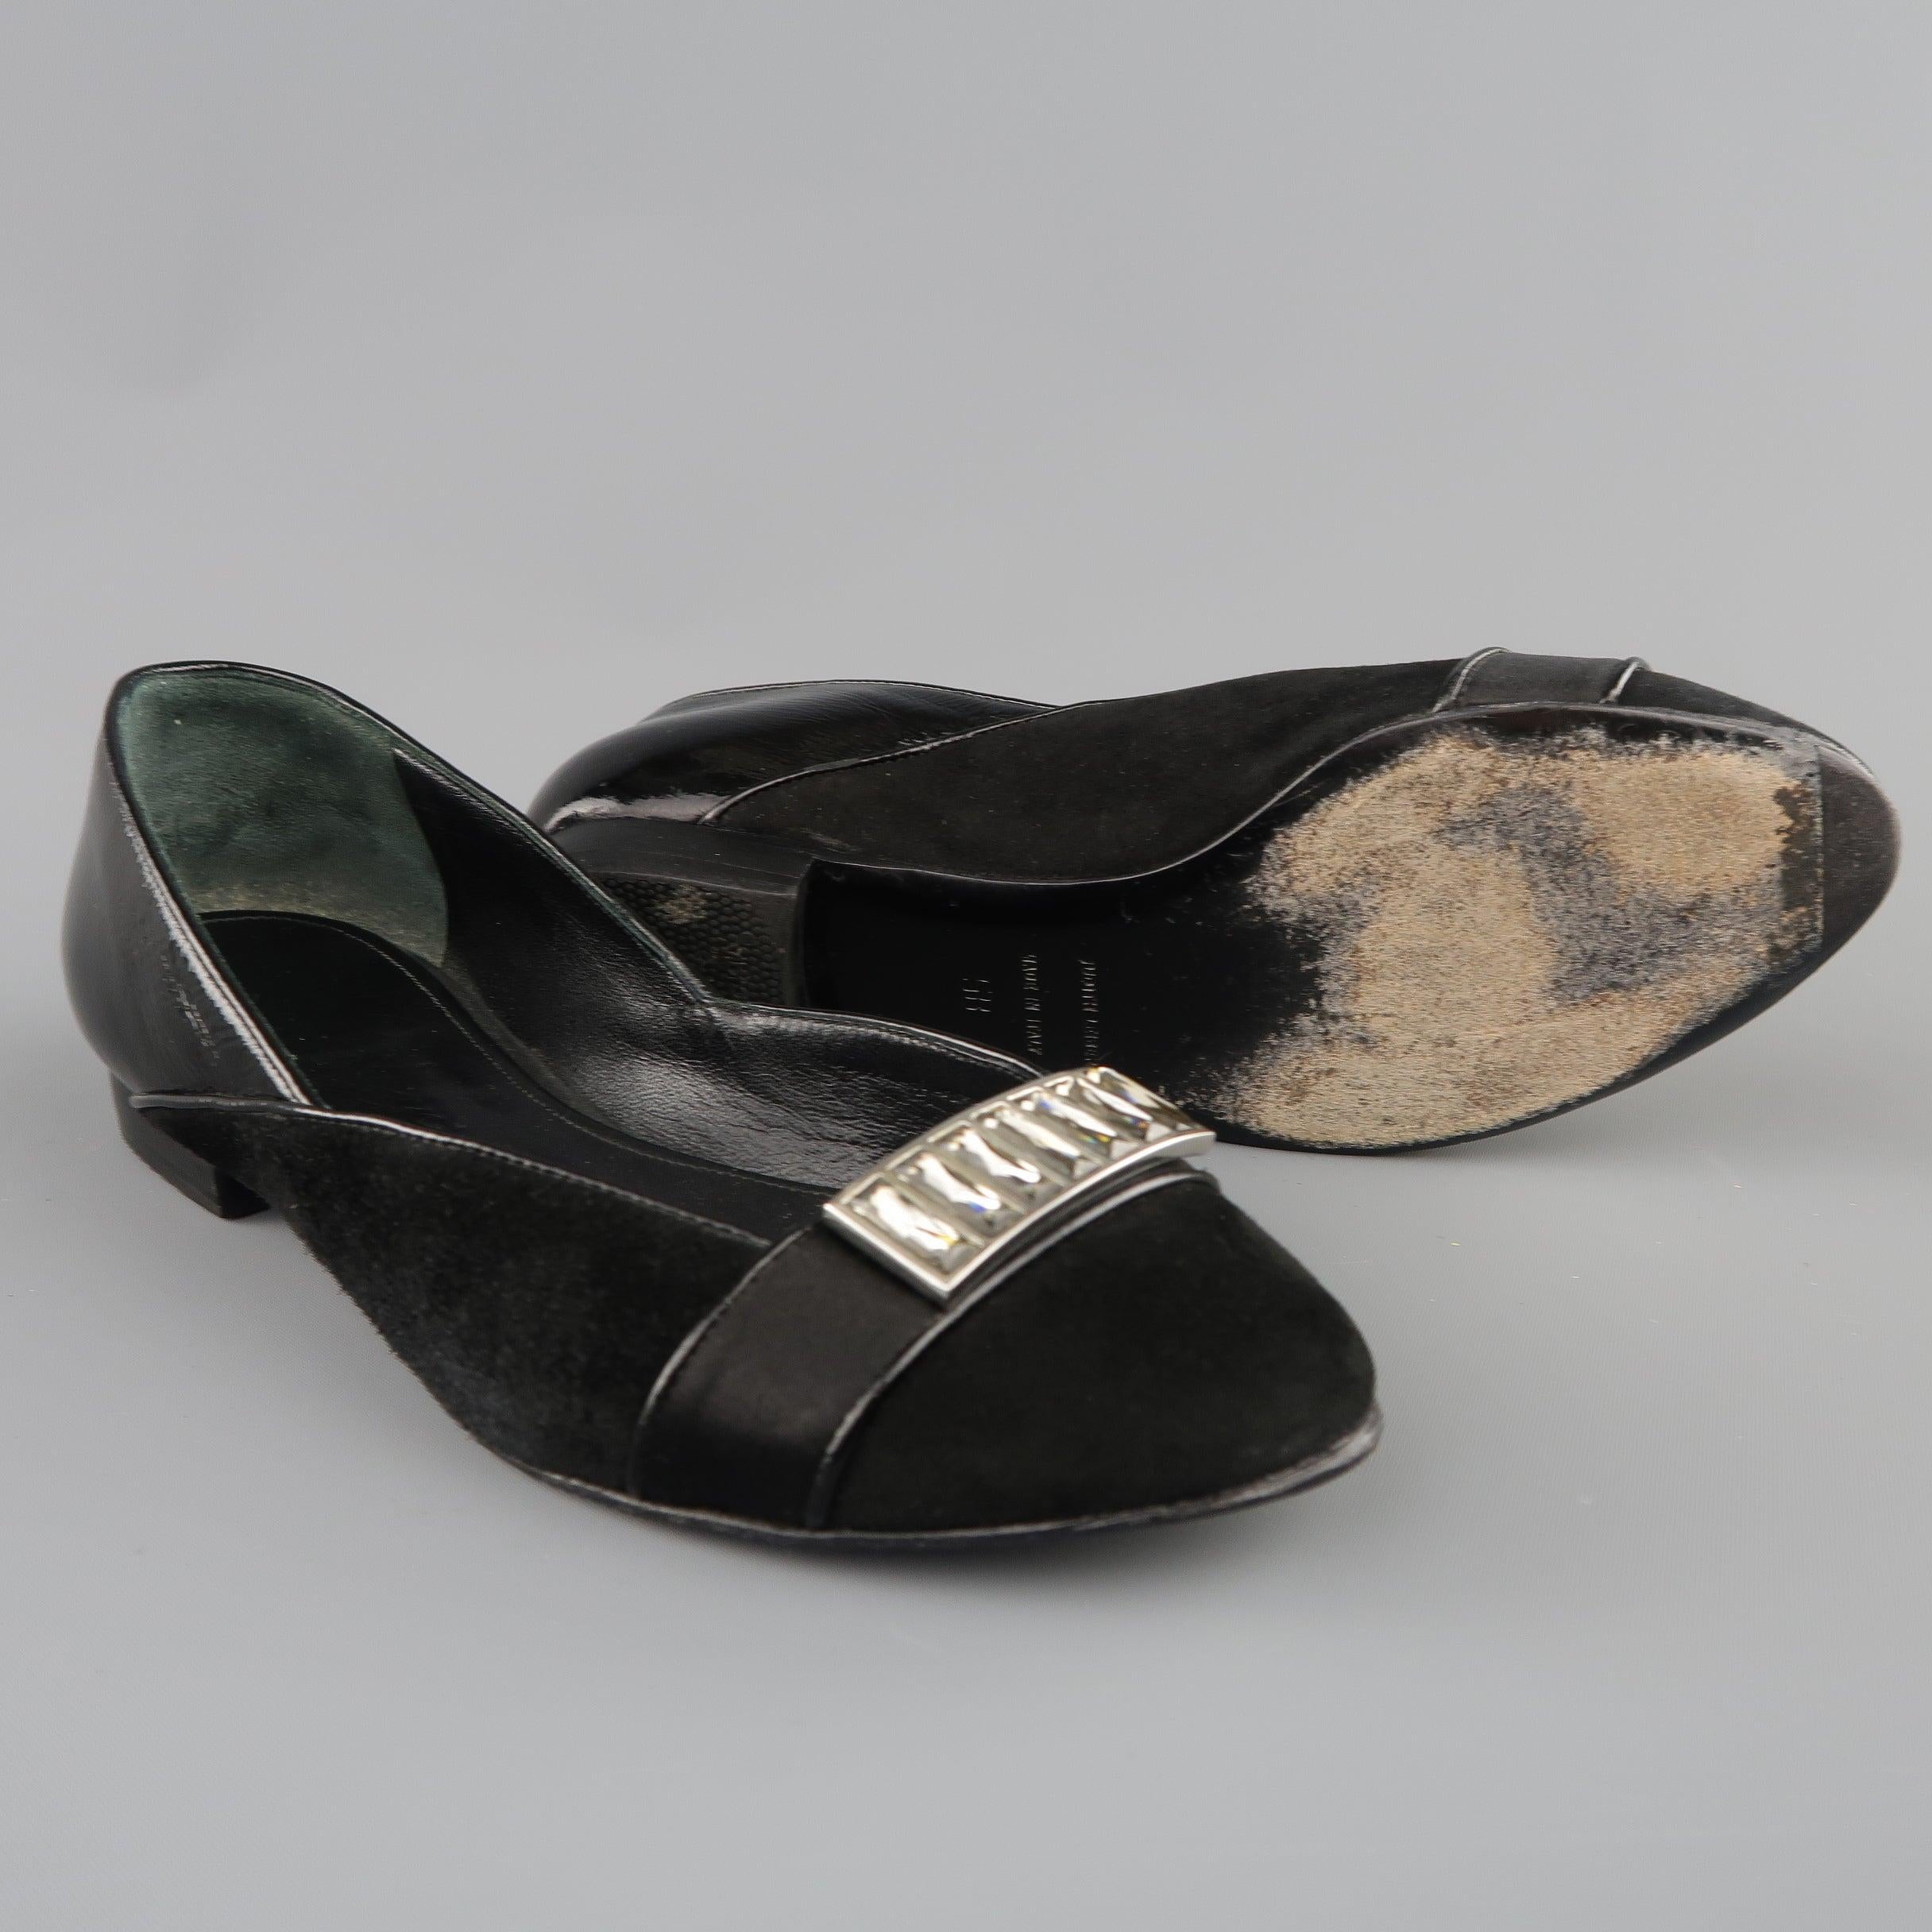 JUDITH LEIBER Size 5 Black Suede & Patent Leather Rhinestone Flats In Good Condition For Sale In San Francisco, CA